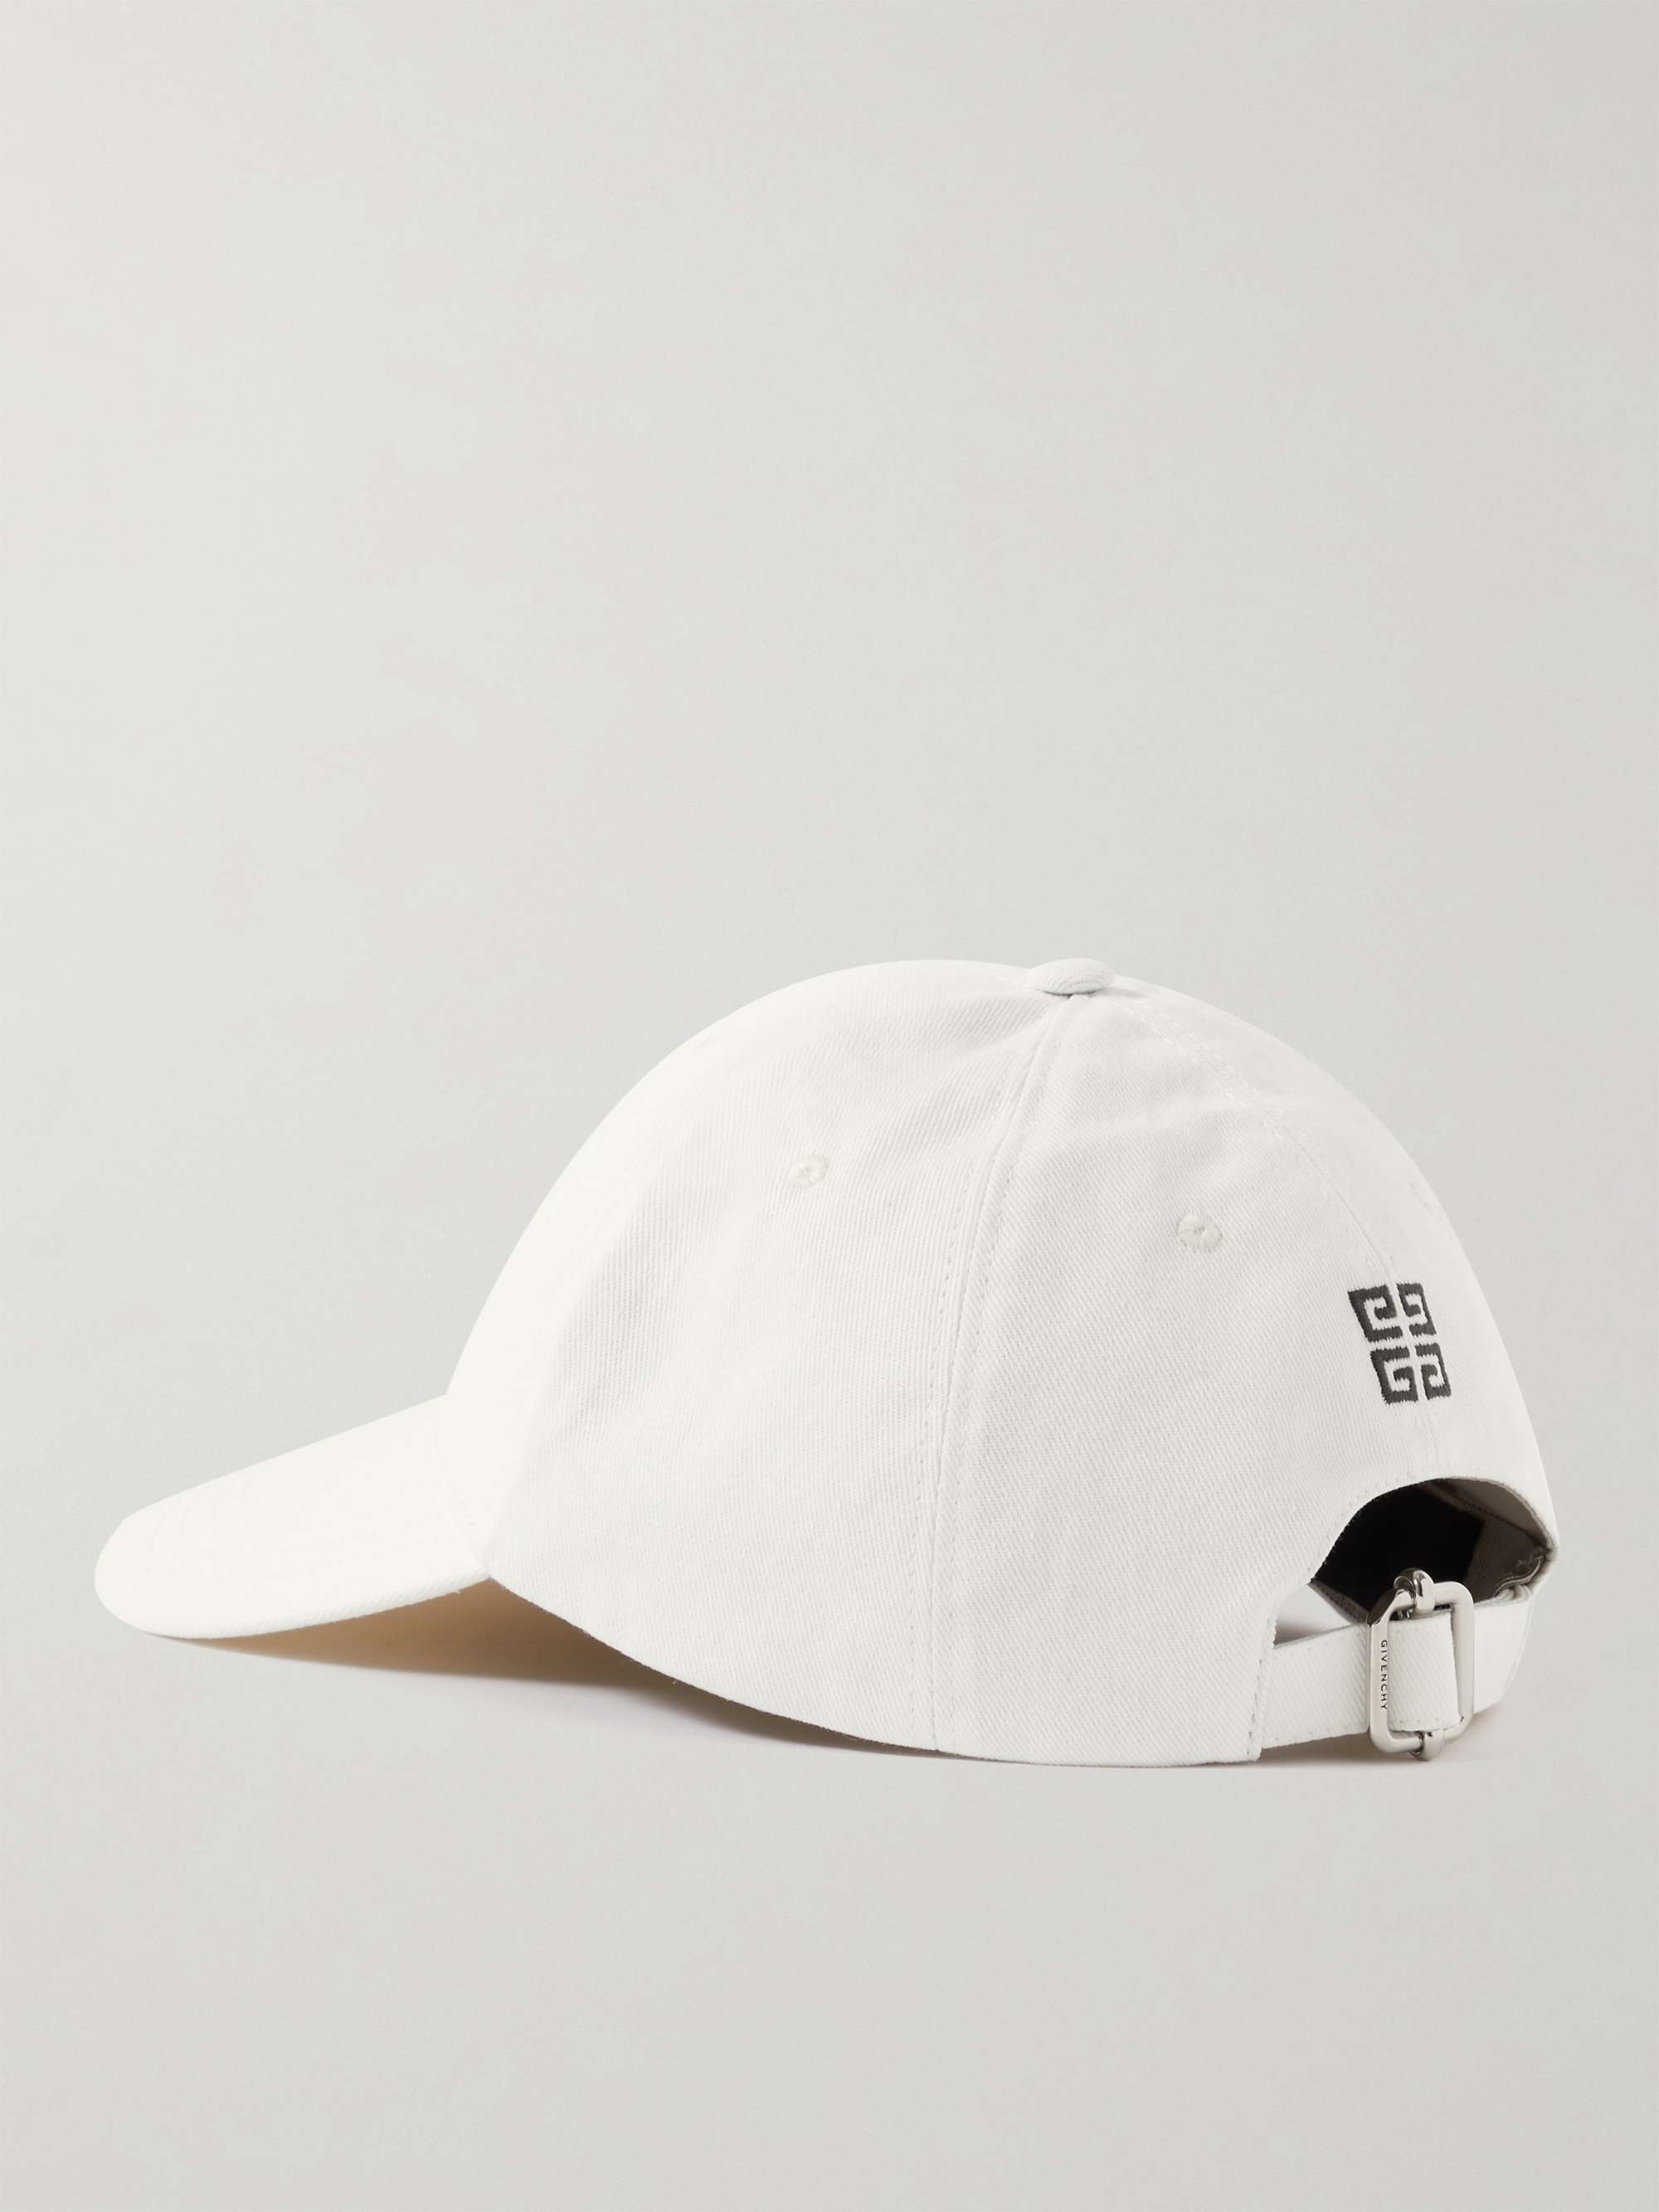 GIVENCHY Logo-Embroidered Cotton-Blend Twill Baseball Cap